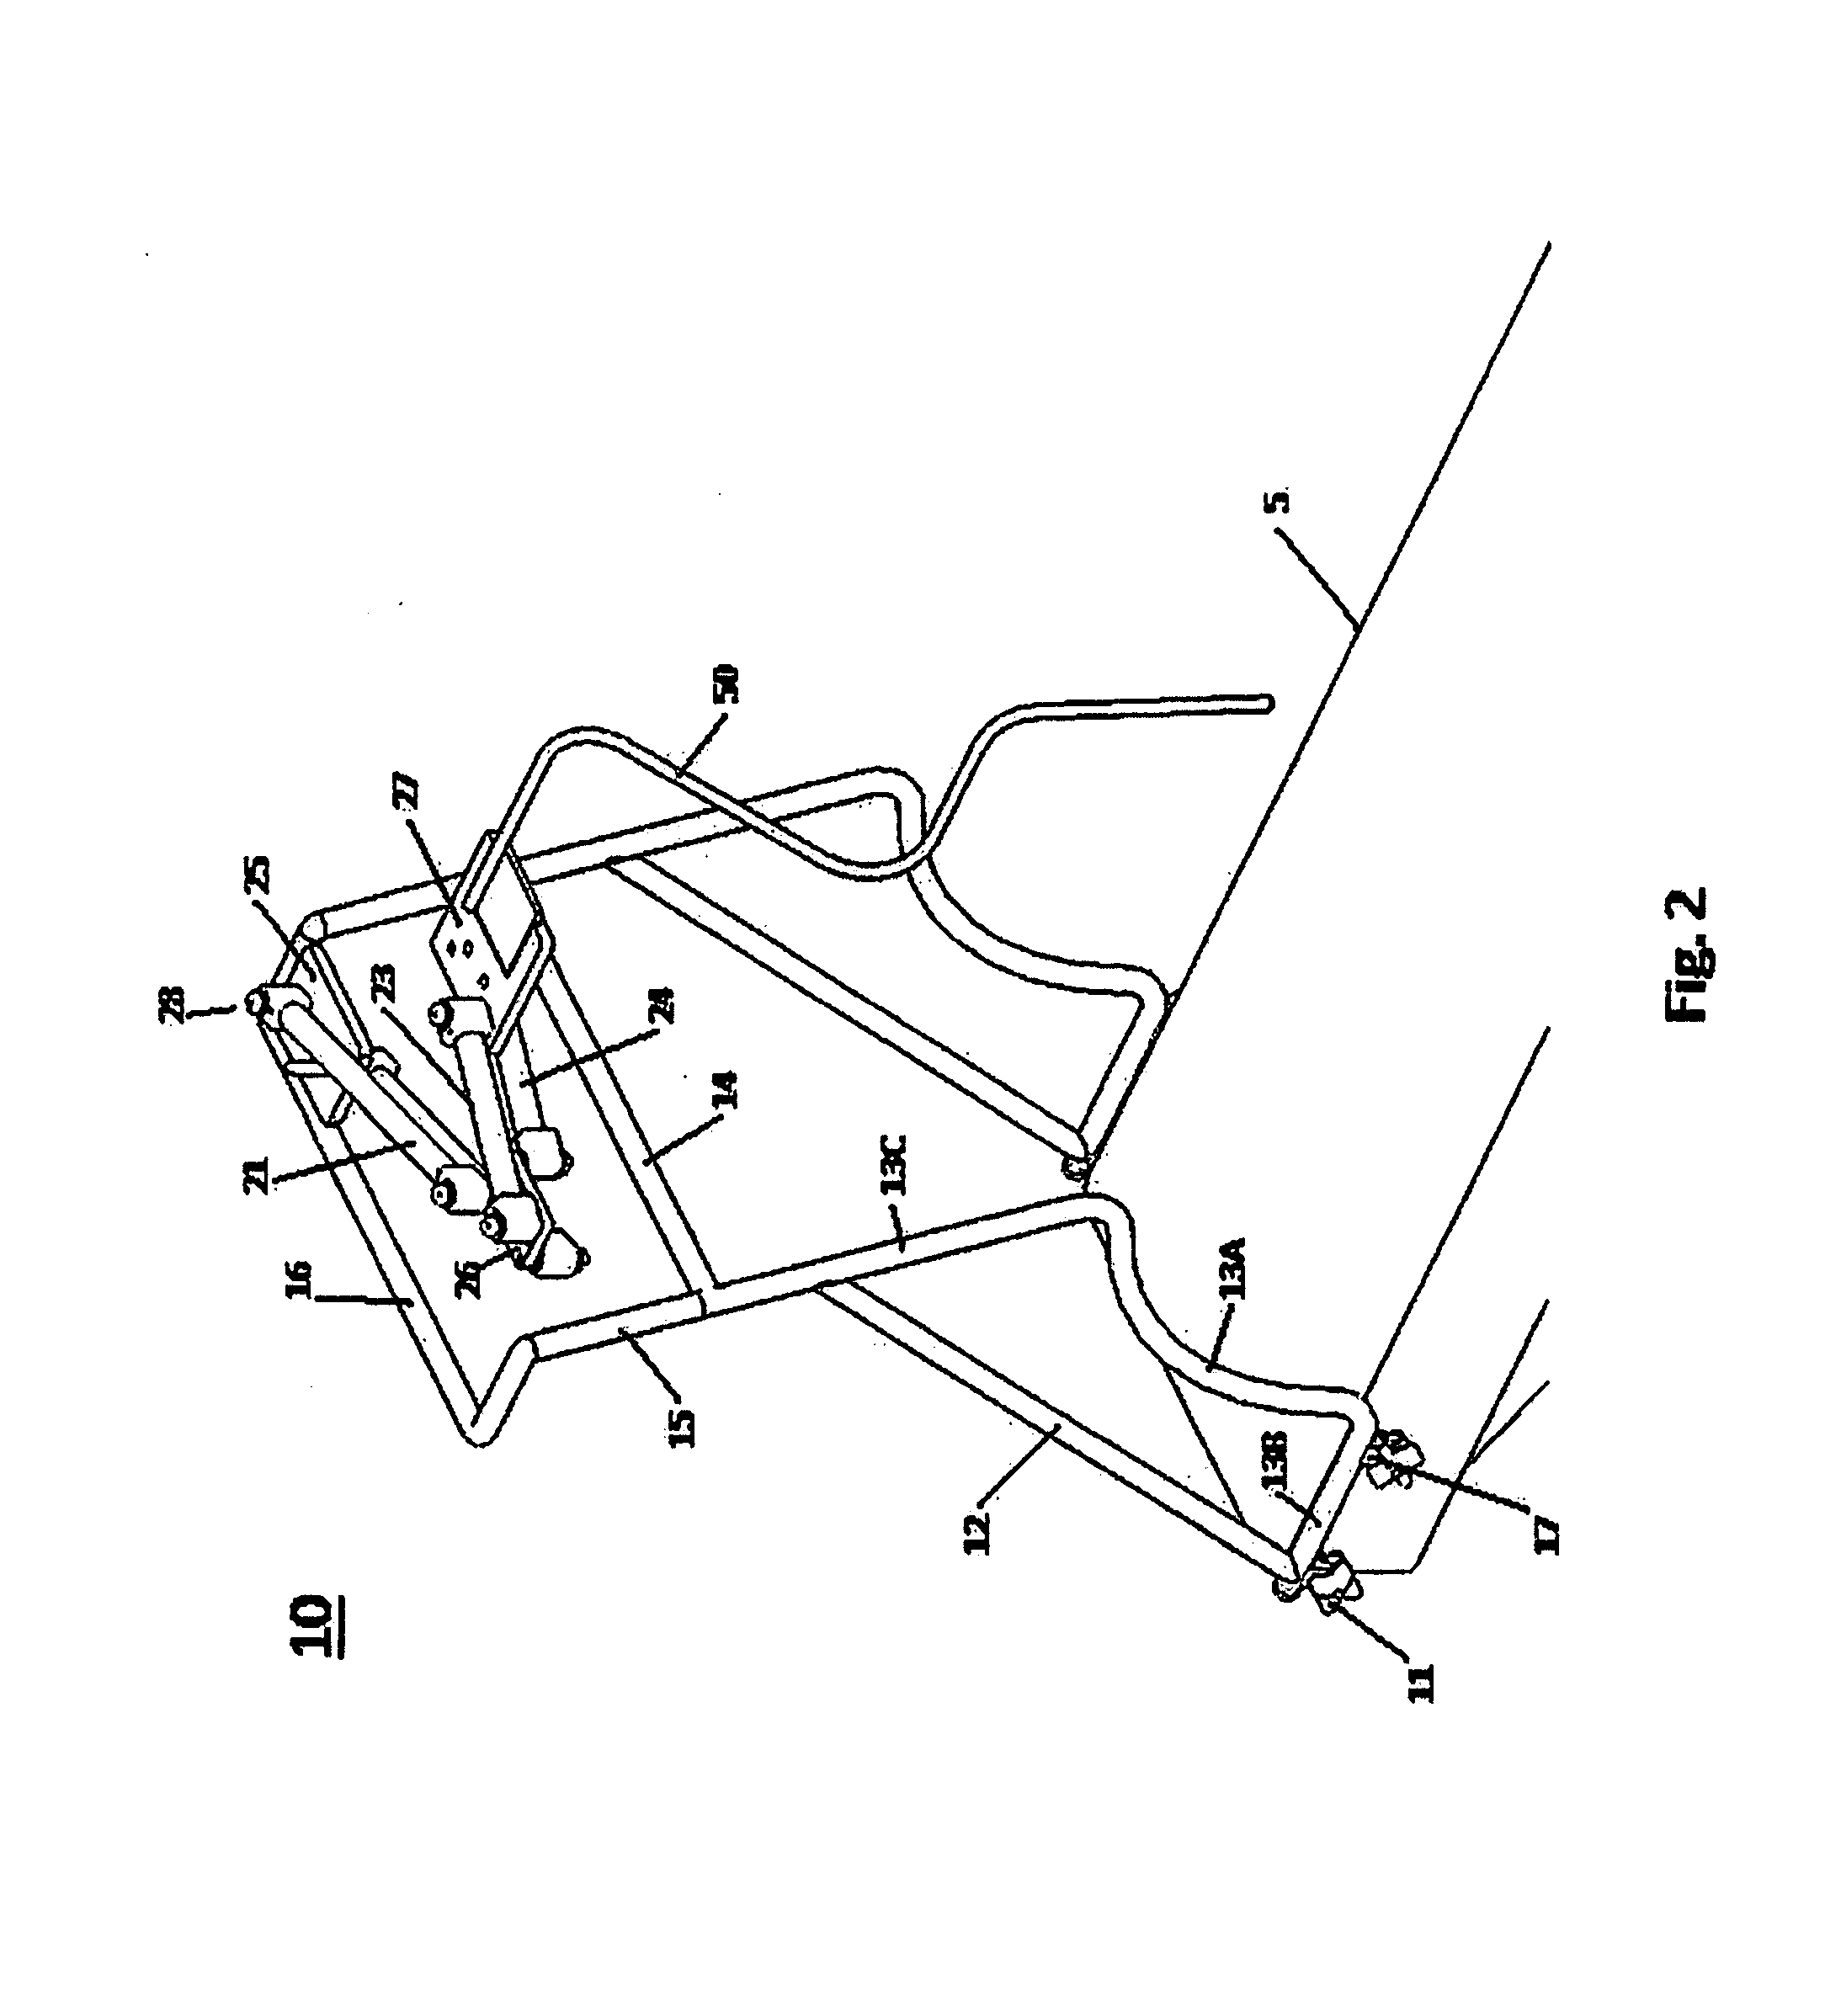 Surgical equipment supporting frames and attachments for same